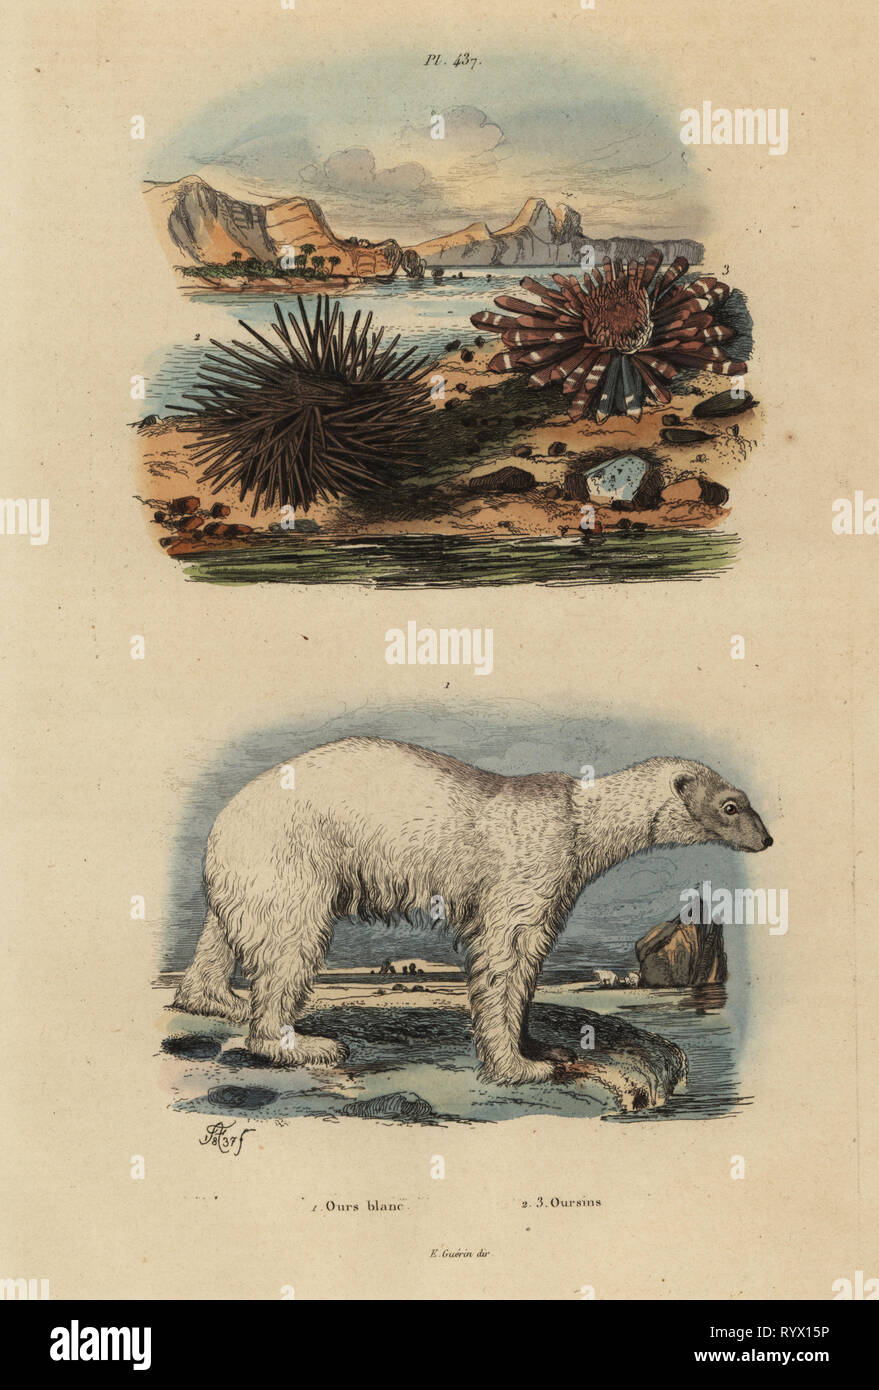 Polar bear, Ursus maritimus 1, vulnerable, edible sea urchin, Echinus esculentus 2 and red pencil urchin, Heterocentrotus mammillatus 3. Ours blanc, Oursins. Handcoloured steel engraving by Adolph Fries from Felix-Edouard Guerin-Meneville's Dictionnaire Pittoresque d'Histoire Naturelle (Picturesque Dictionary of Natural History), Paris, 1834-39. Stock Photo